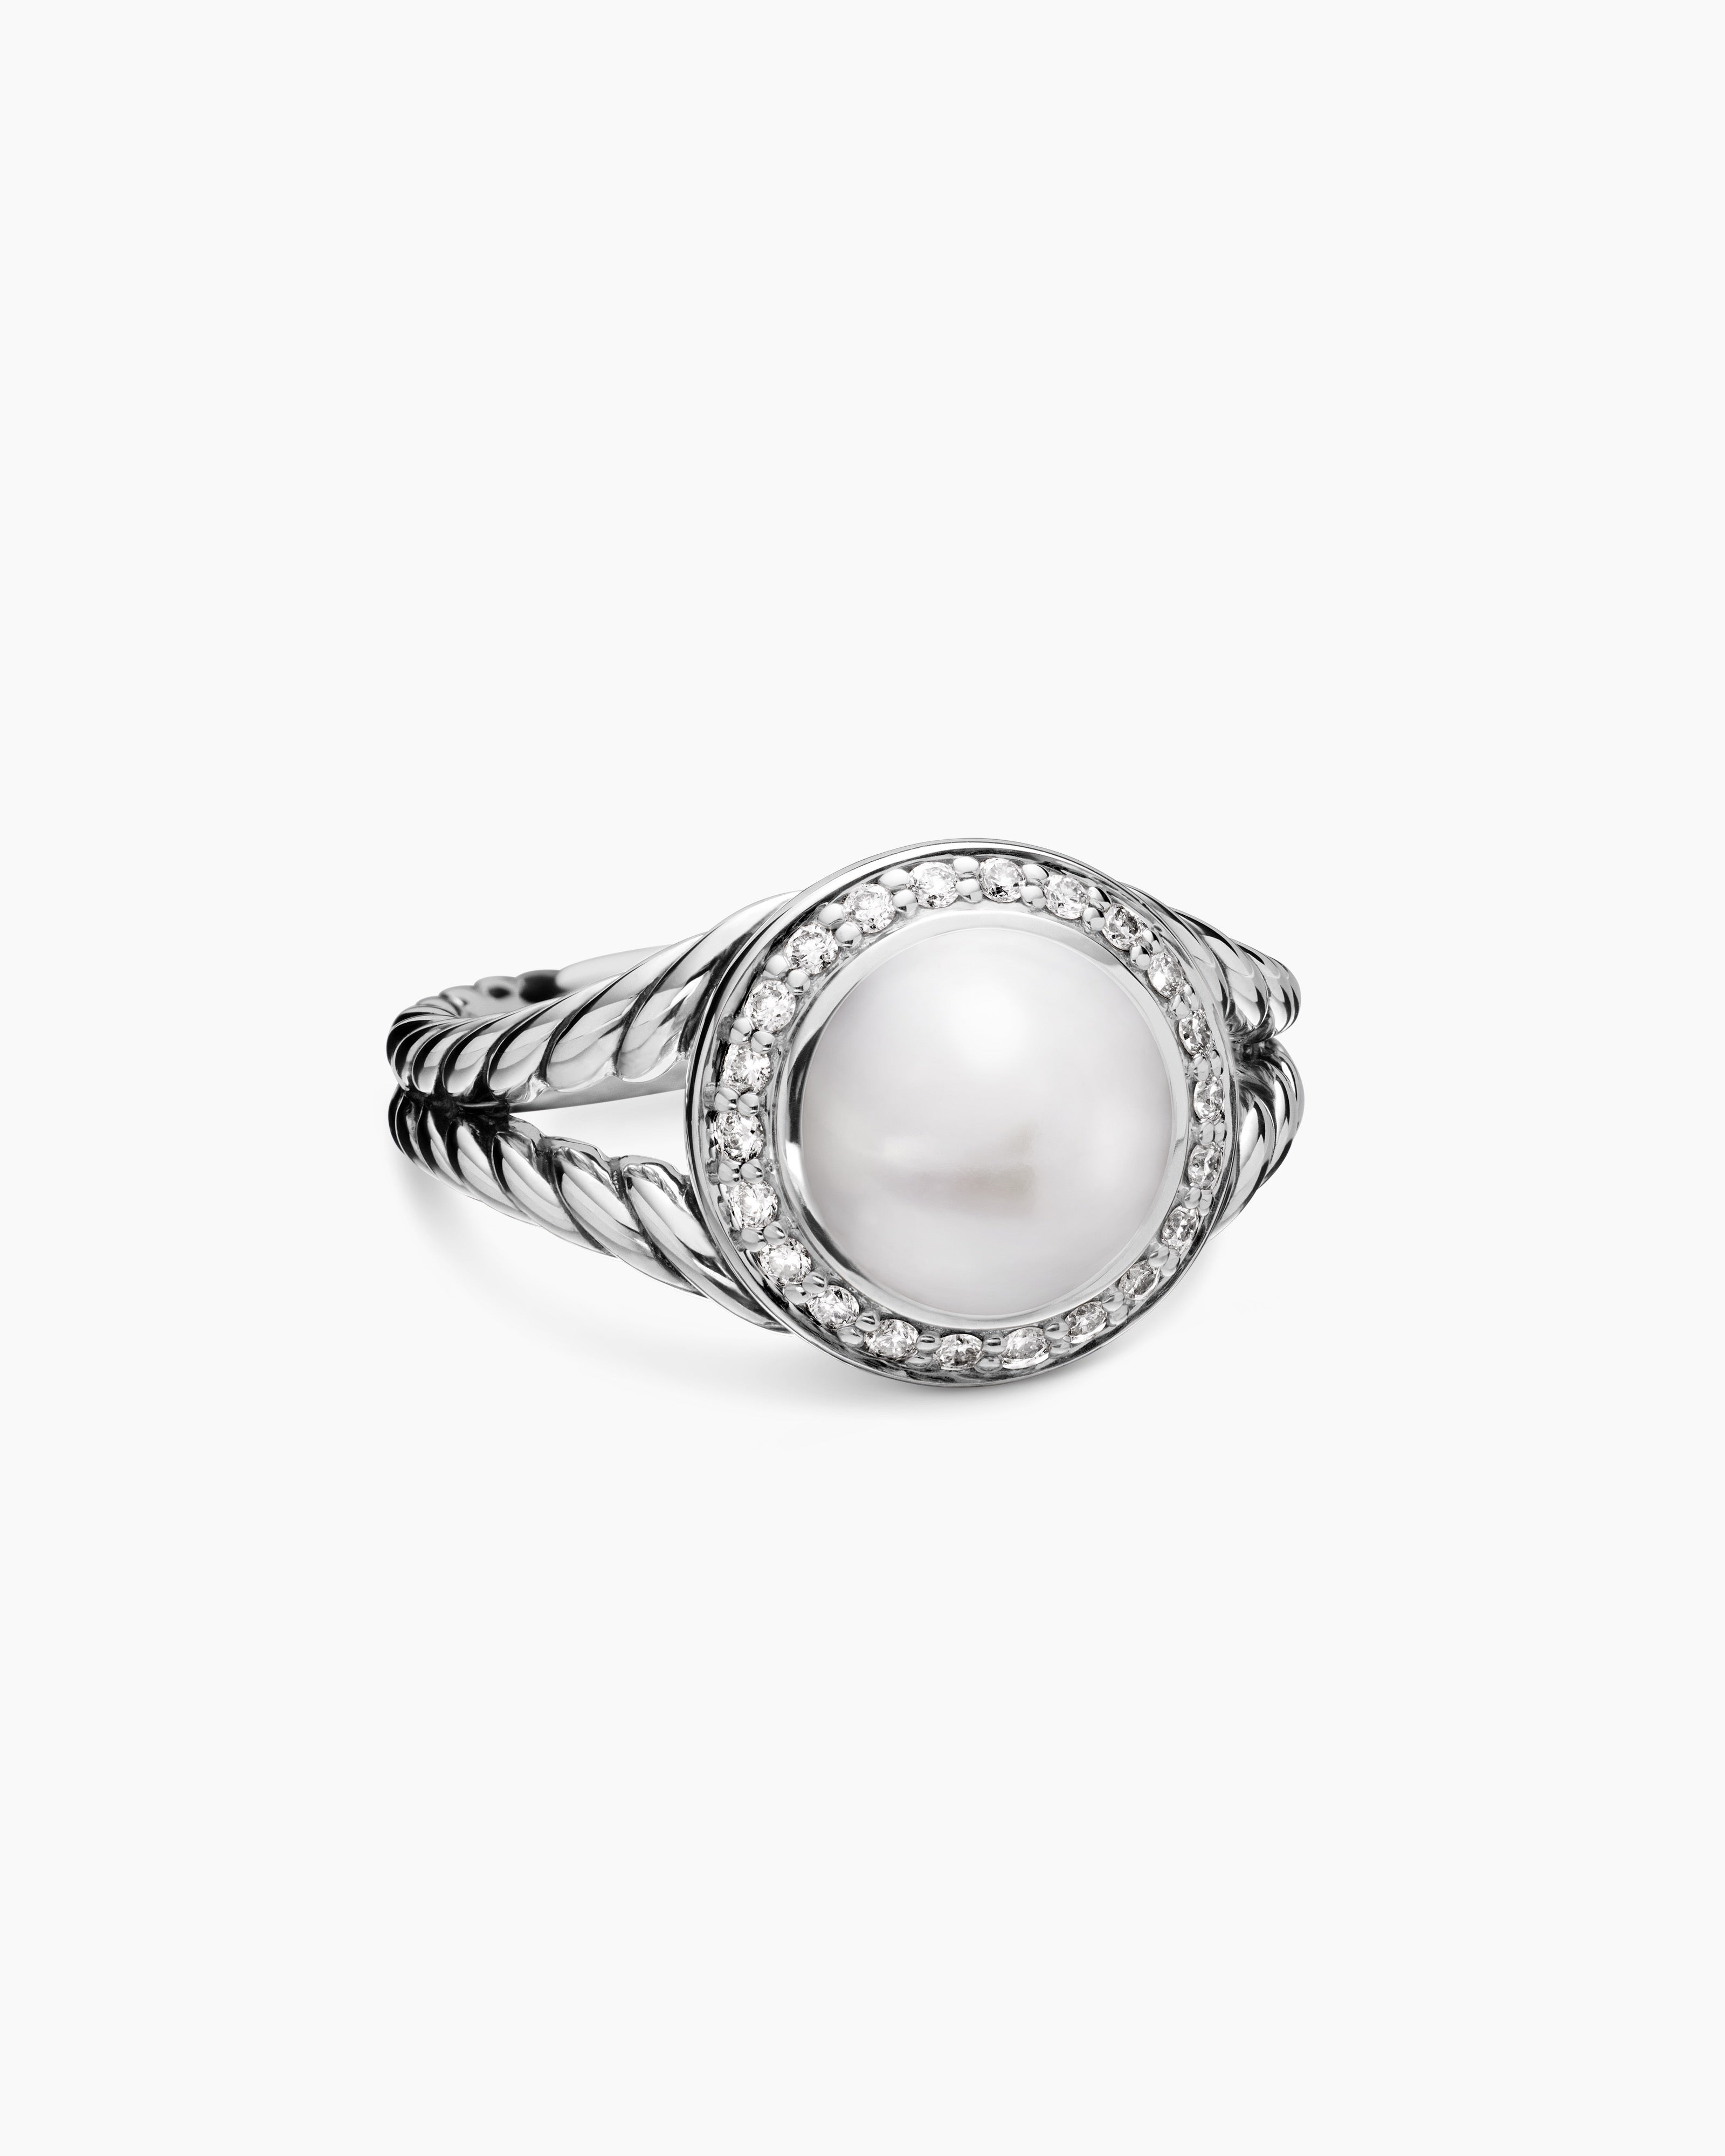 925 Pure Sterling Silver Croissant Ring For Women-Large - Accessorize India